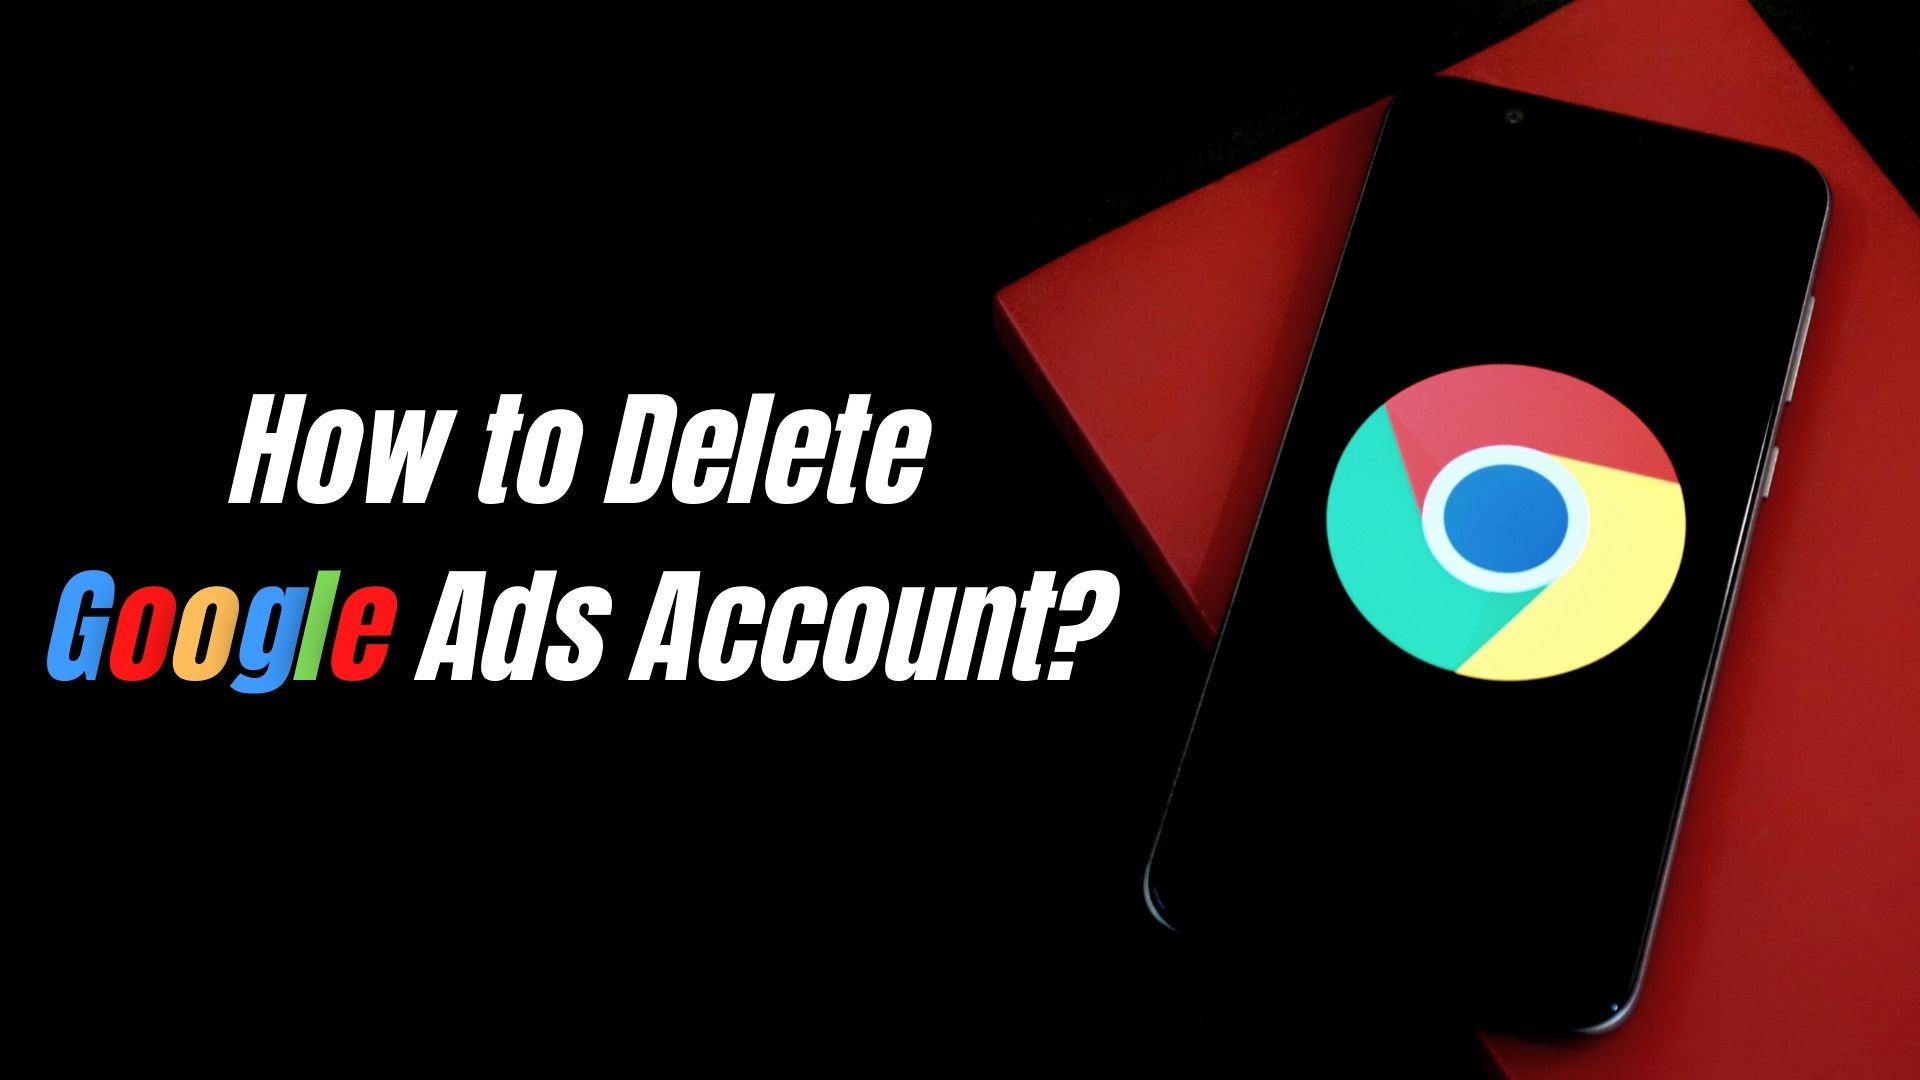 How to Delete Google Ads Account